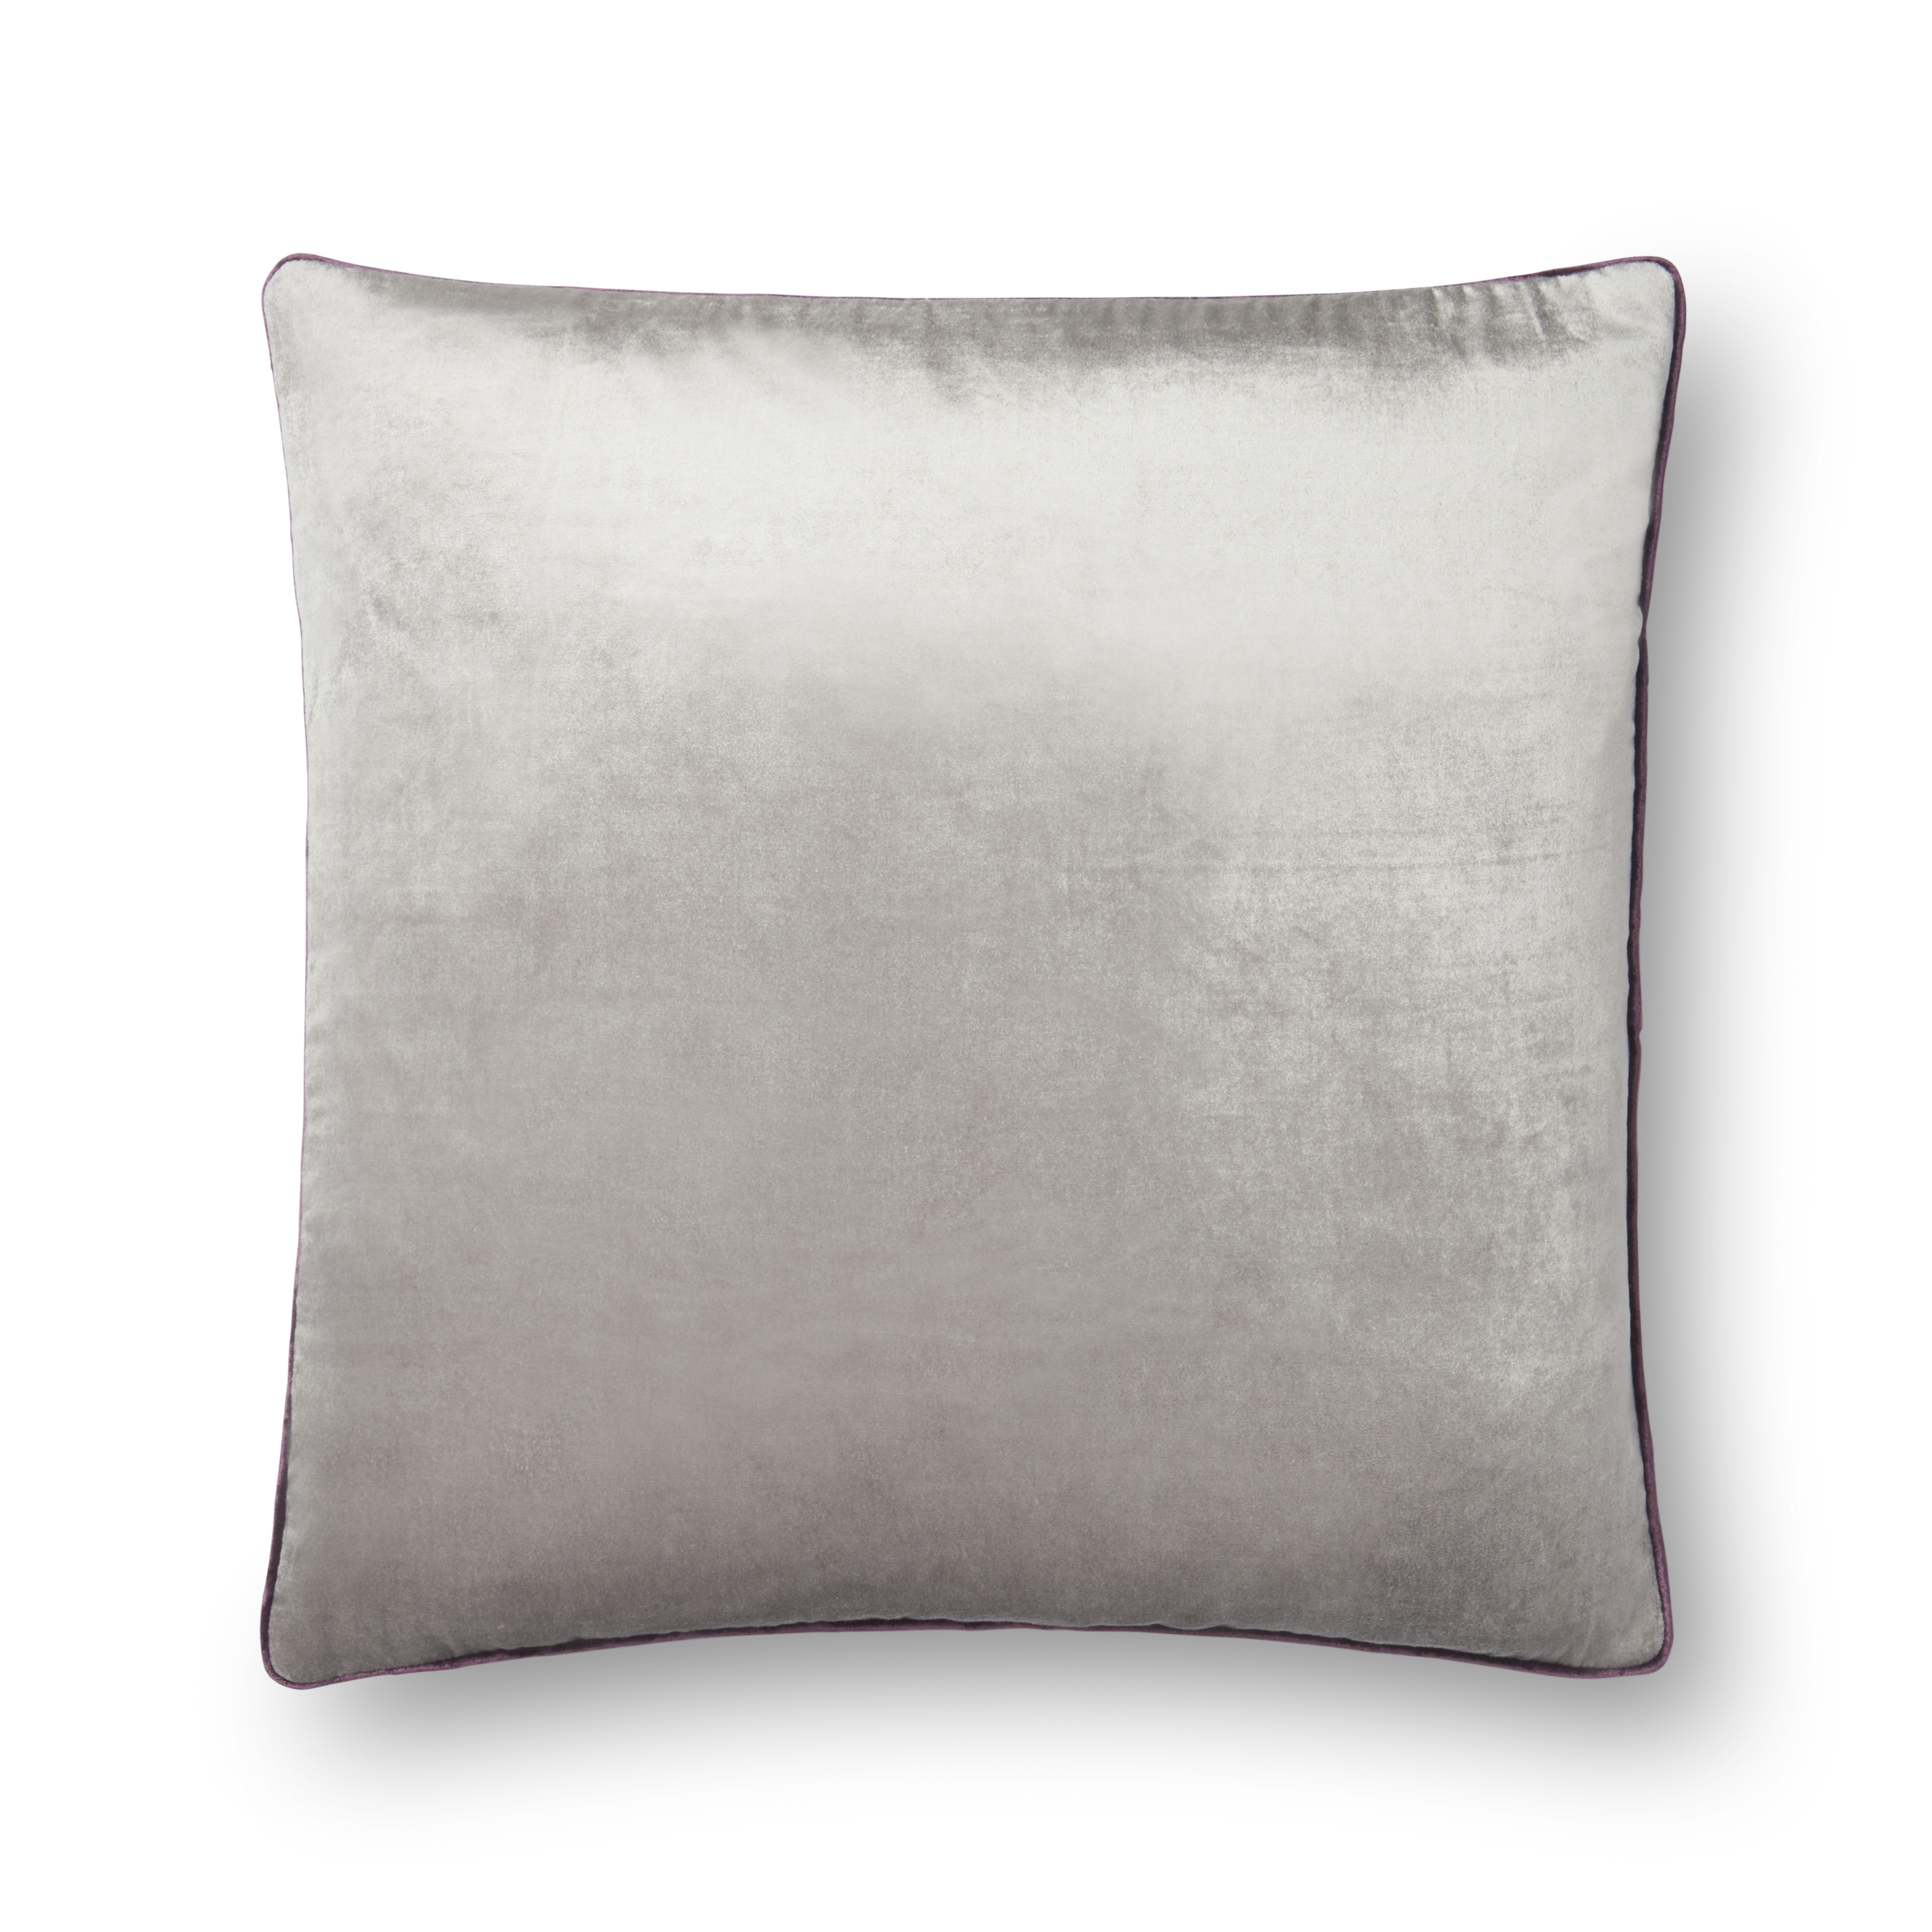 Loloi Pillows P0602 Grey 22" x 22" Cover Only - Loloi Rugs